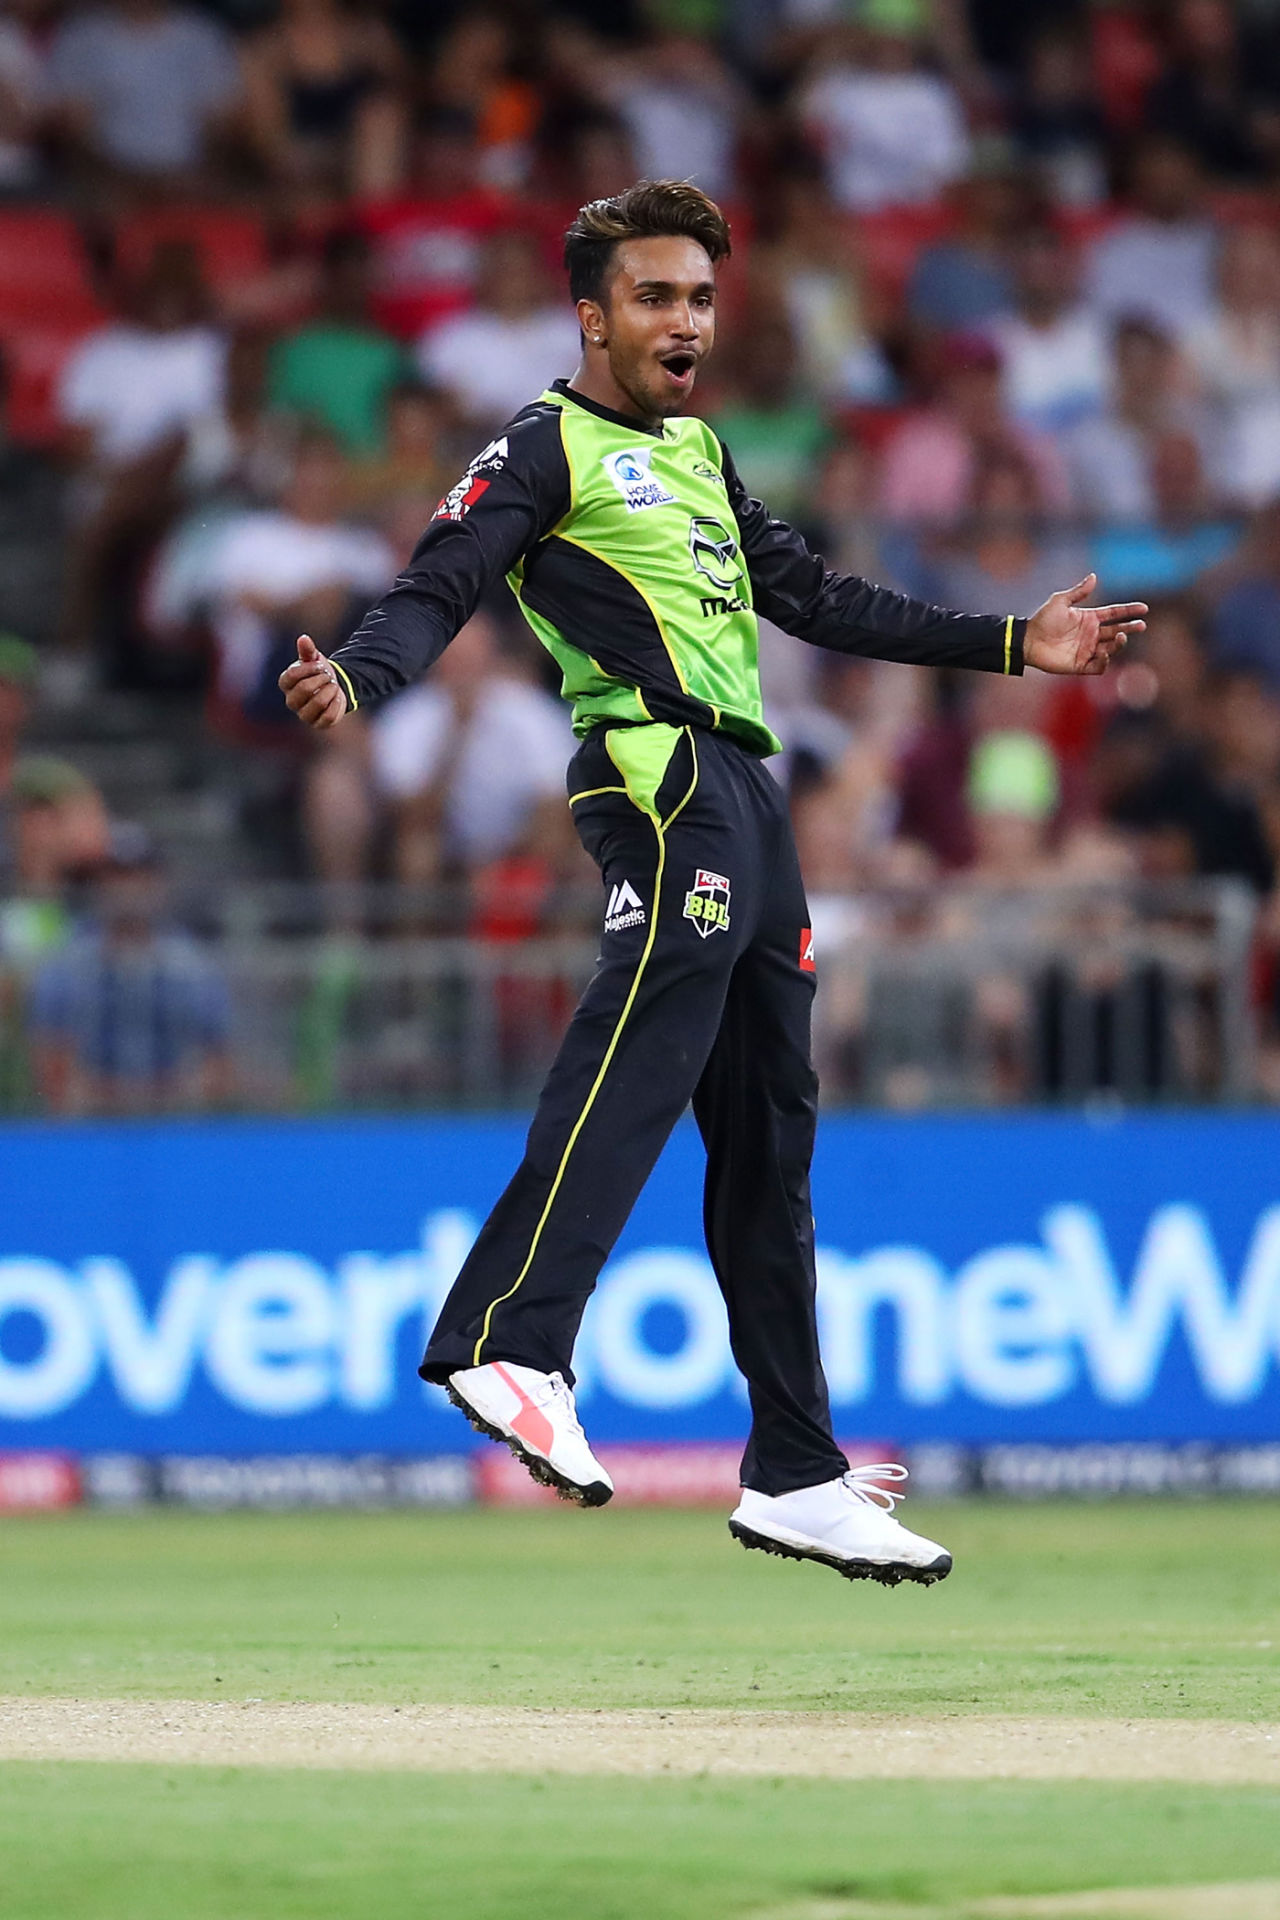 Arjun Nair aced the levitation act after sniping out two Sydney Sixers wickets, Sydney Thunder v Sydney Sixers, Big Bash League 2017-18, Sydney, December 19, 2017